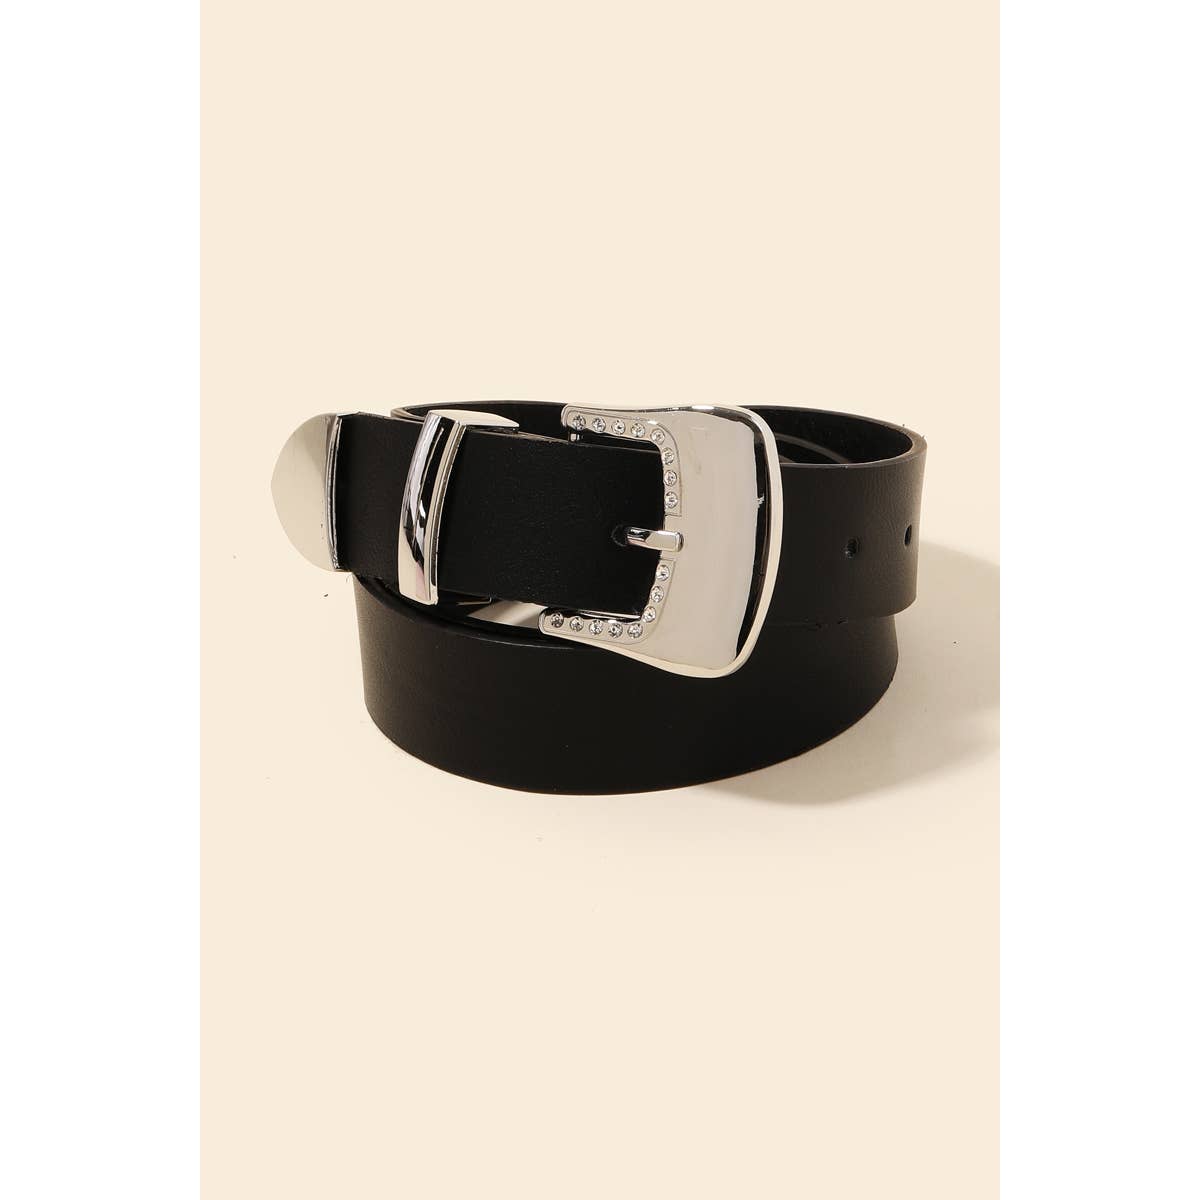 Rhinestone Trim Buckle Faux Leather Belt in Gold and Black